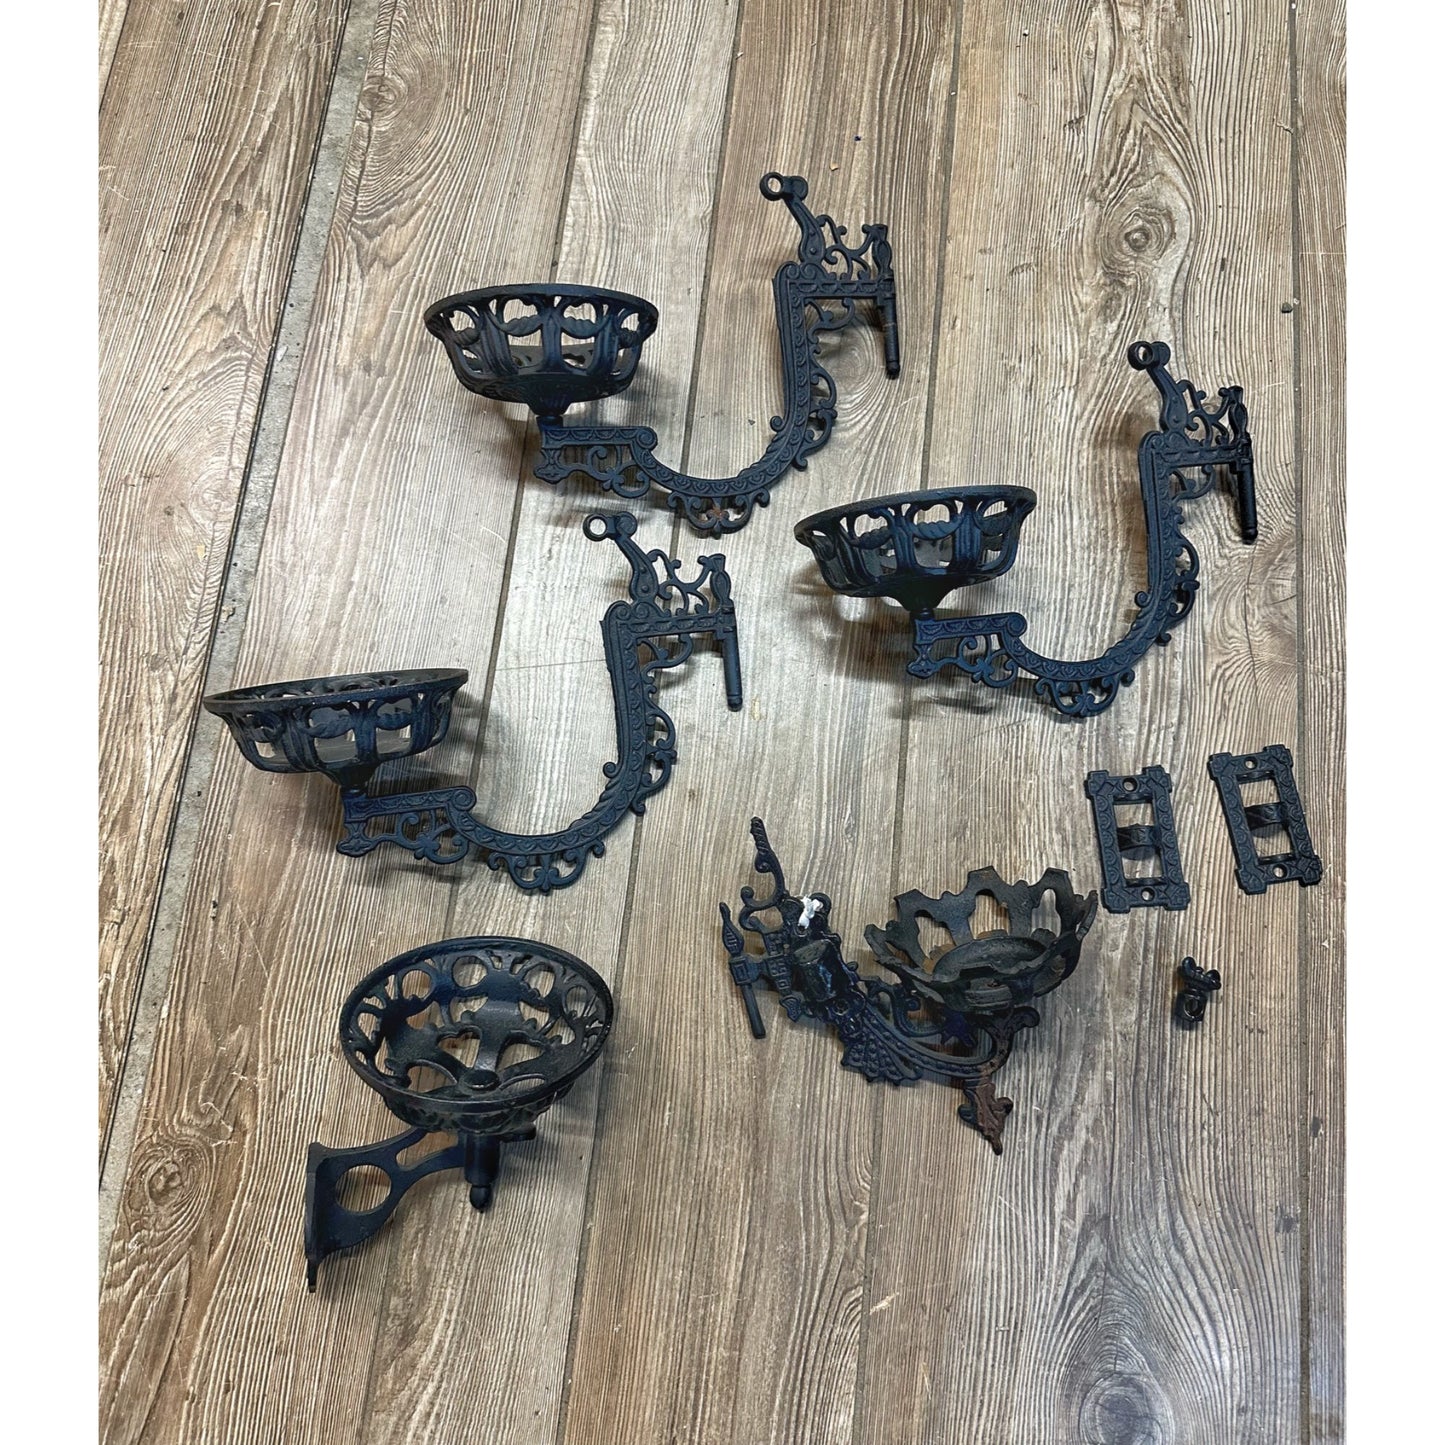 ANTIQUE CAST IRON OIL LAMP WALL MOUNT SWING ARM HOLDER LOT (5)